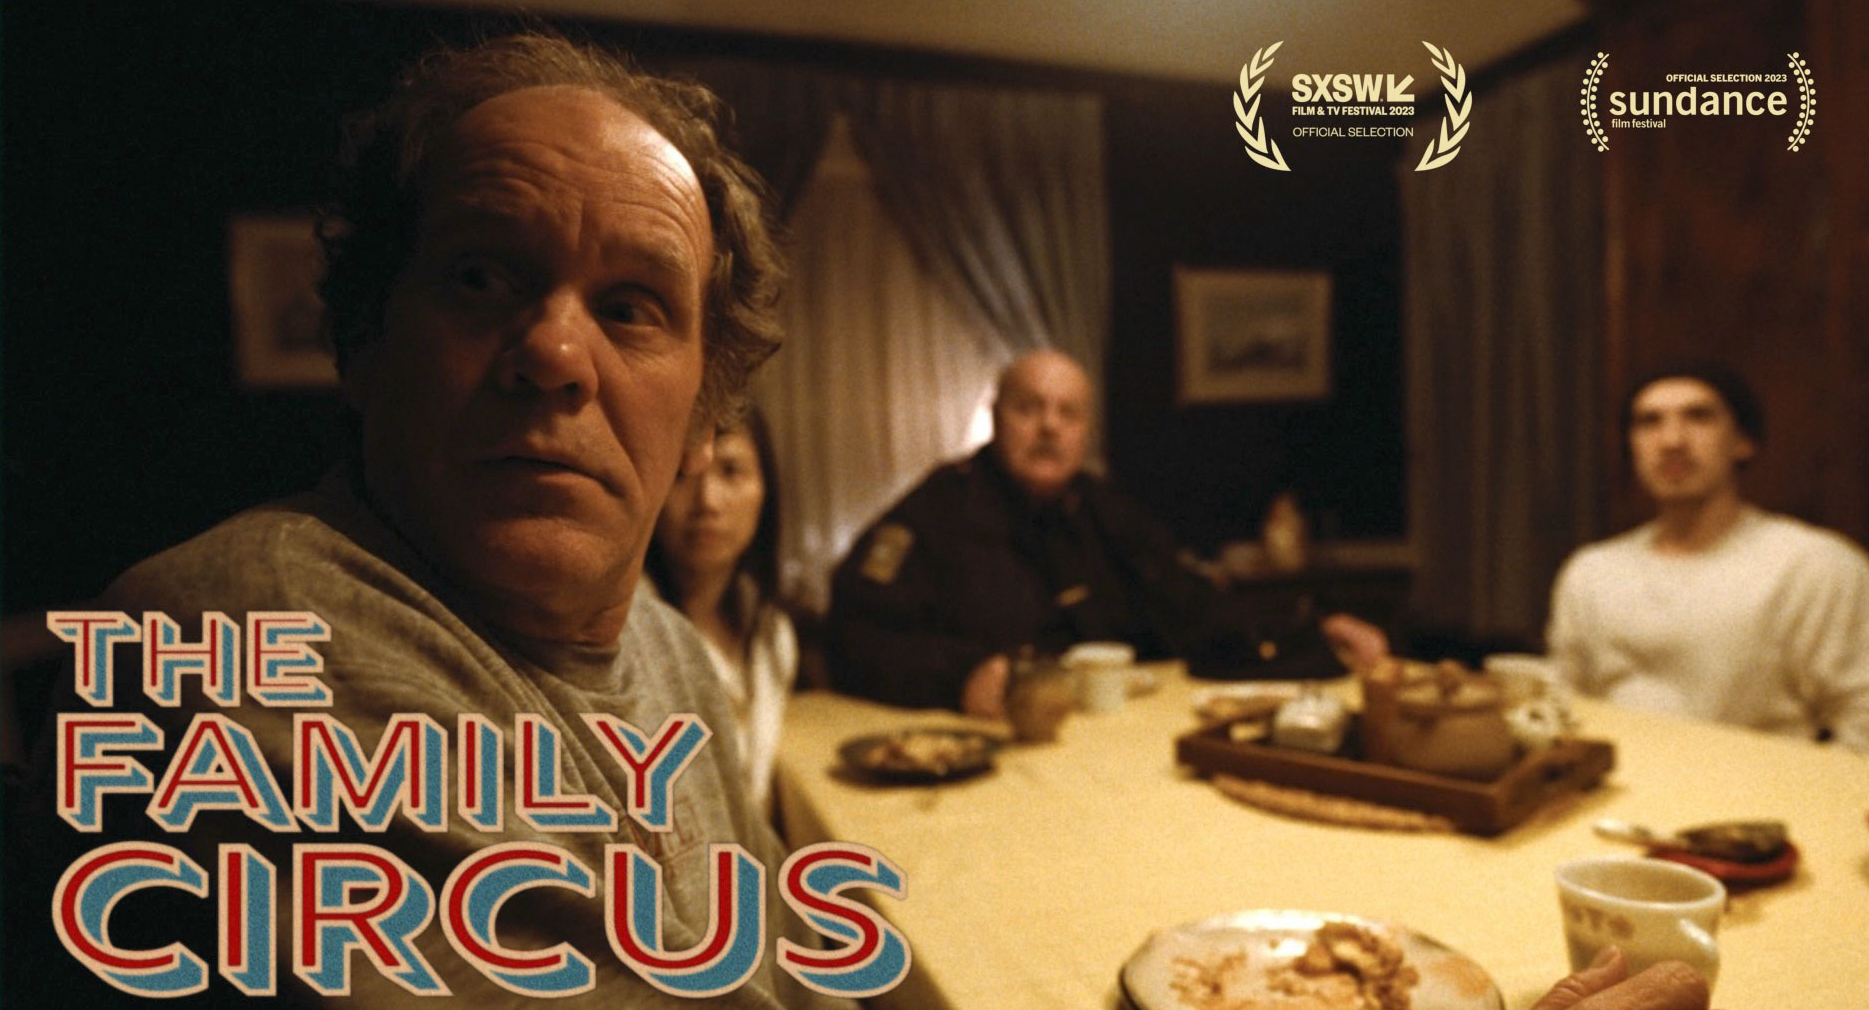 THE FAMILY CIRCUS | DIR. ANDREW FITZGERALD